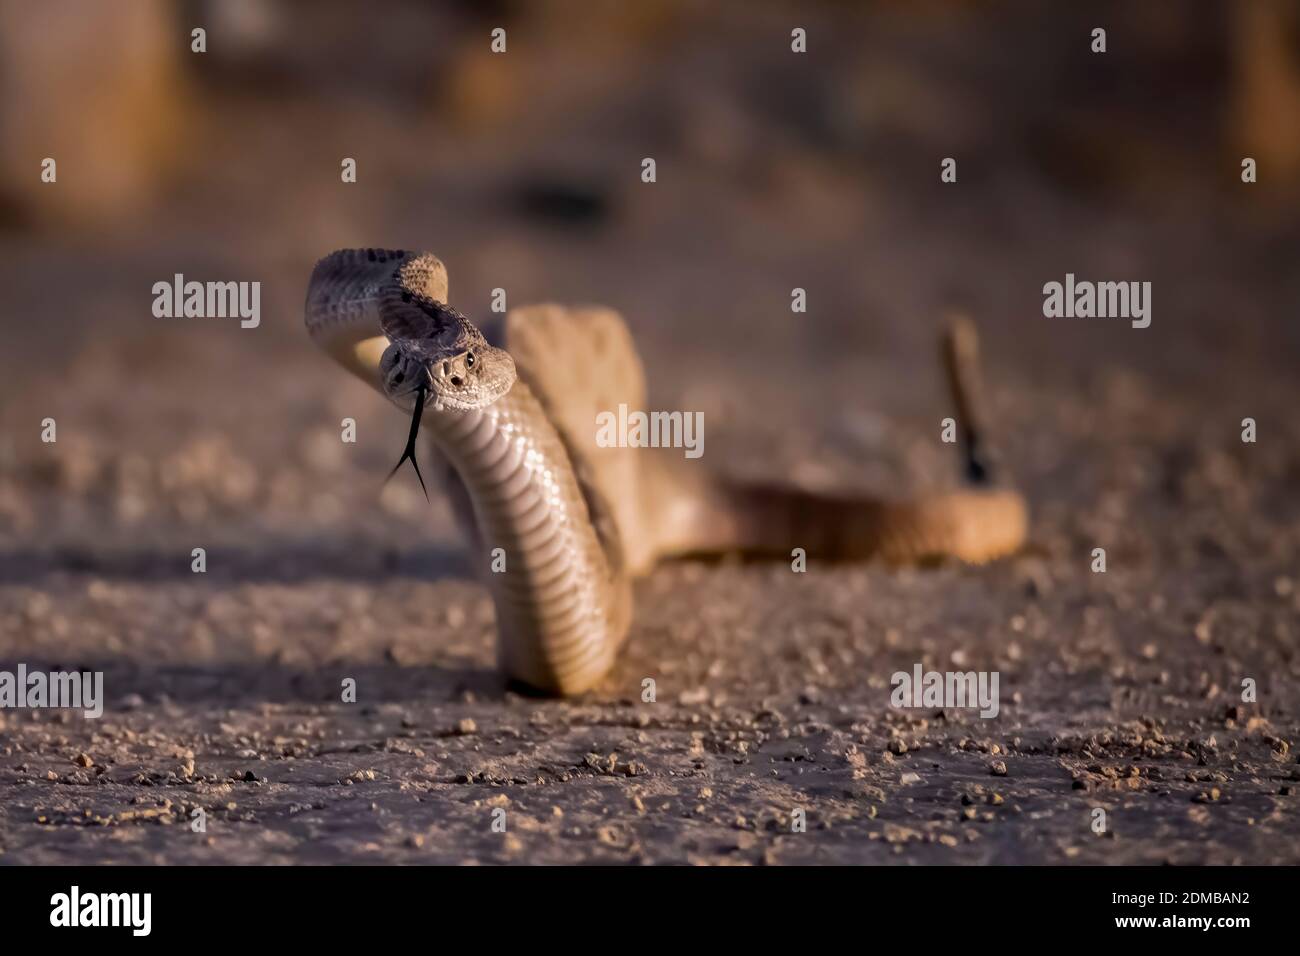 Western diamondback rattlesnake low angle close up rising from dirt road with tongue extended. Stock Photo